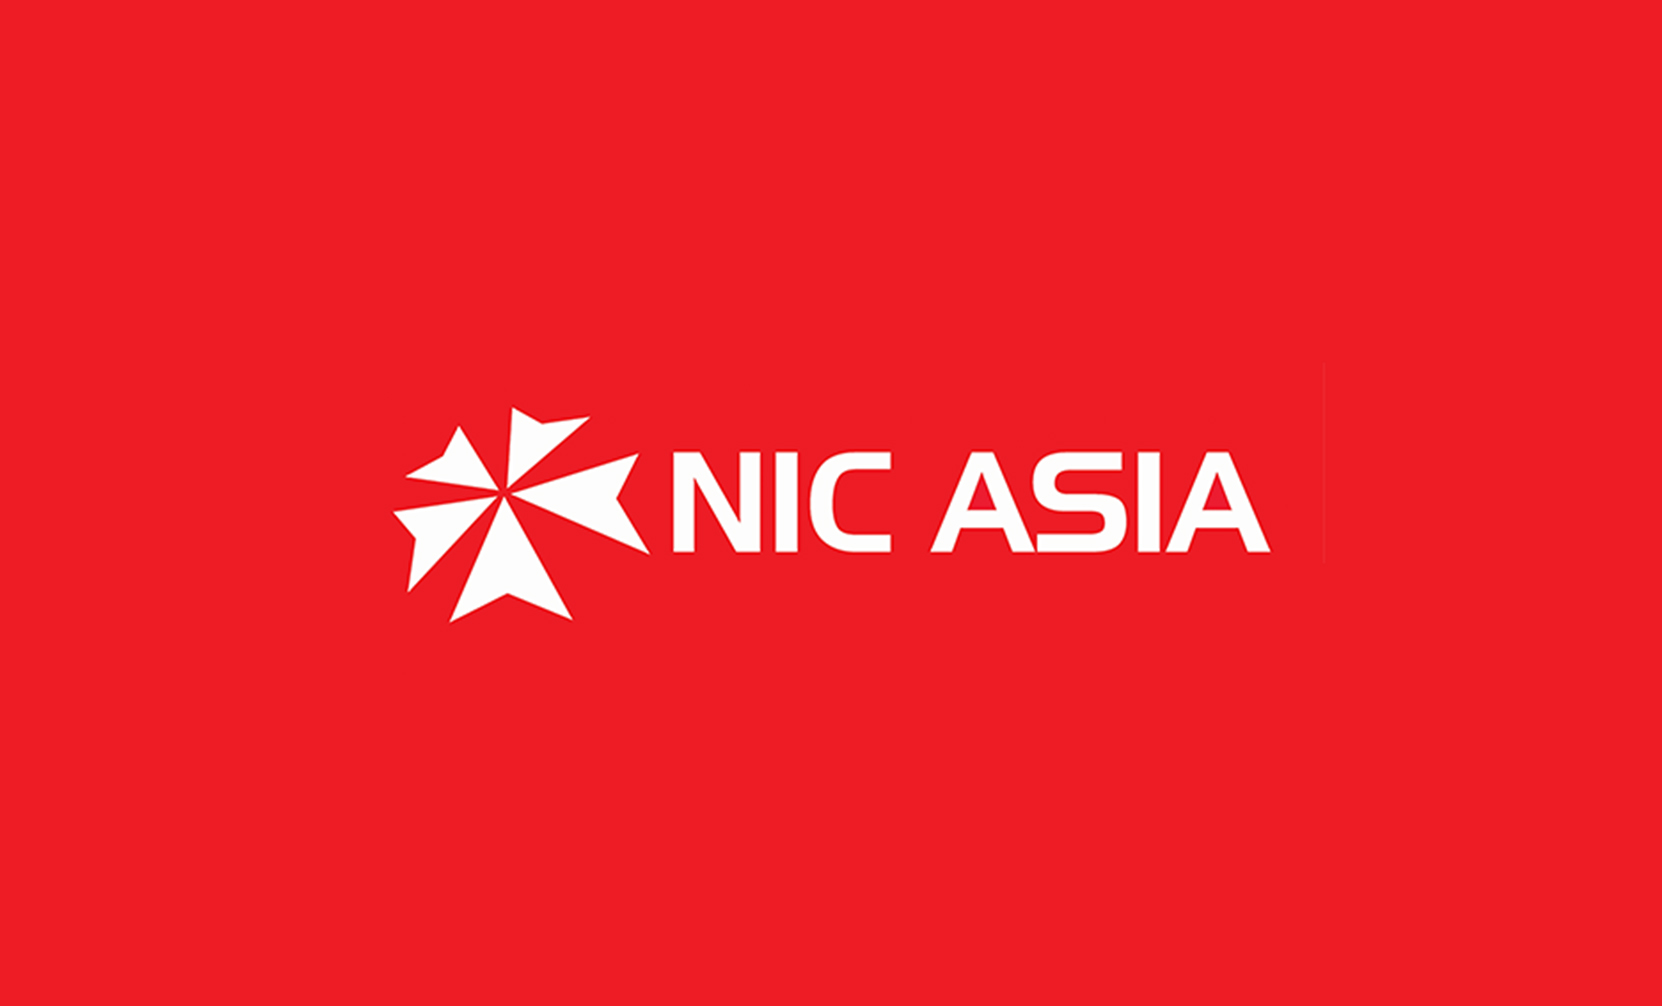 NIC Asia Bank proposes 30.5263% dividend for fiscal year 2079/80